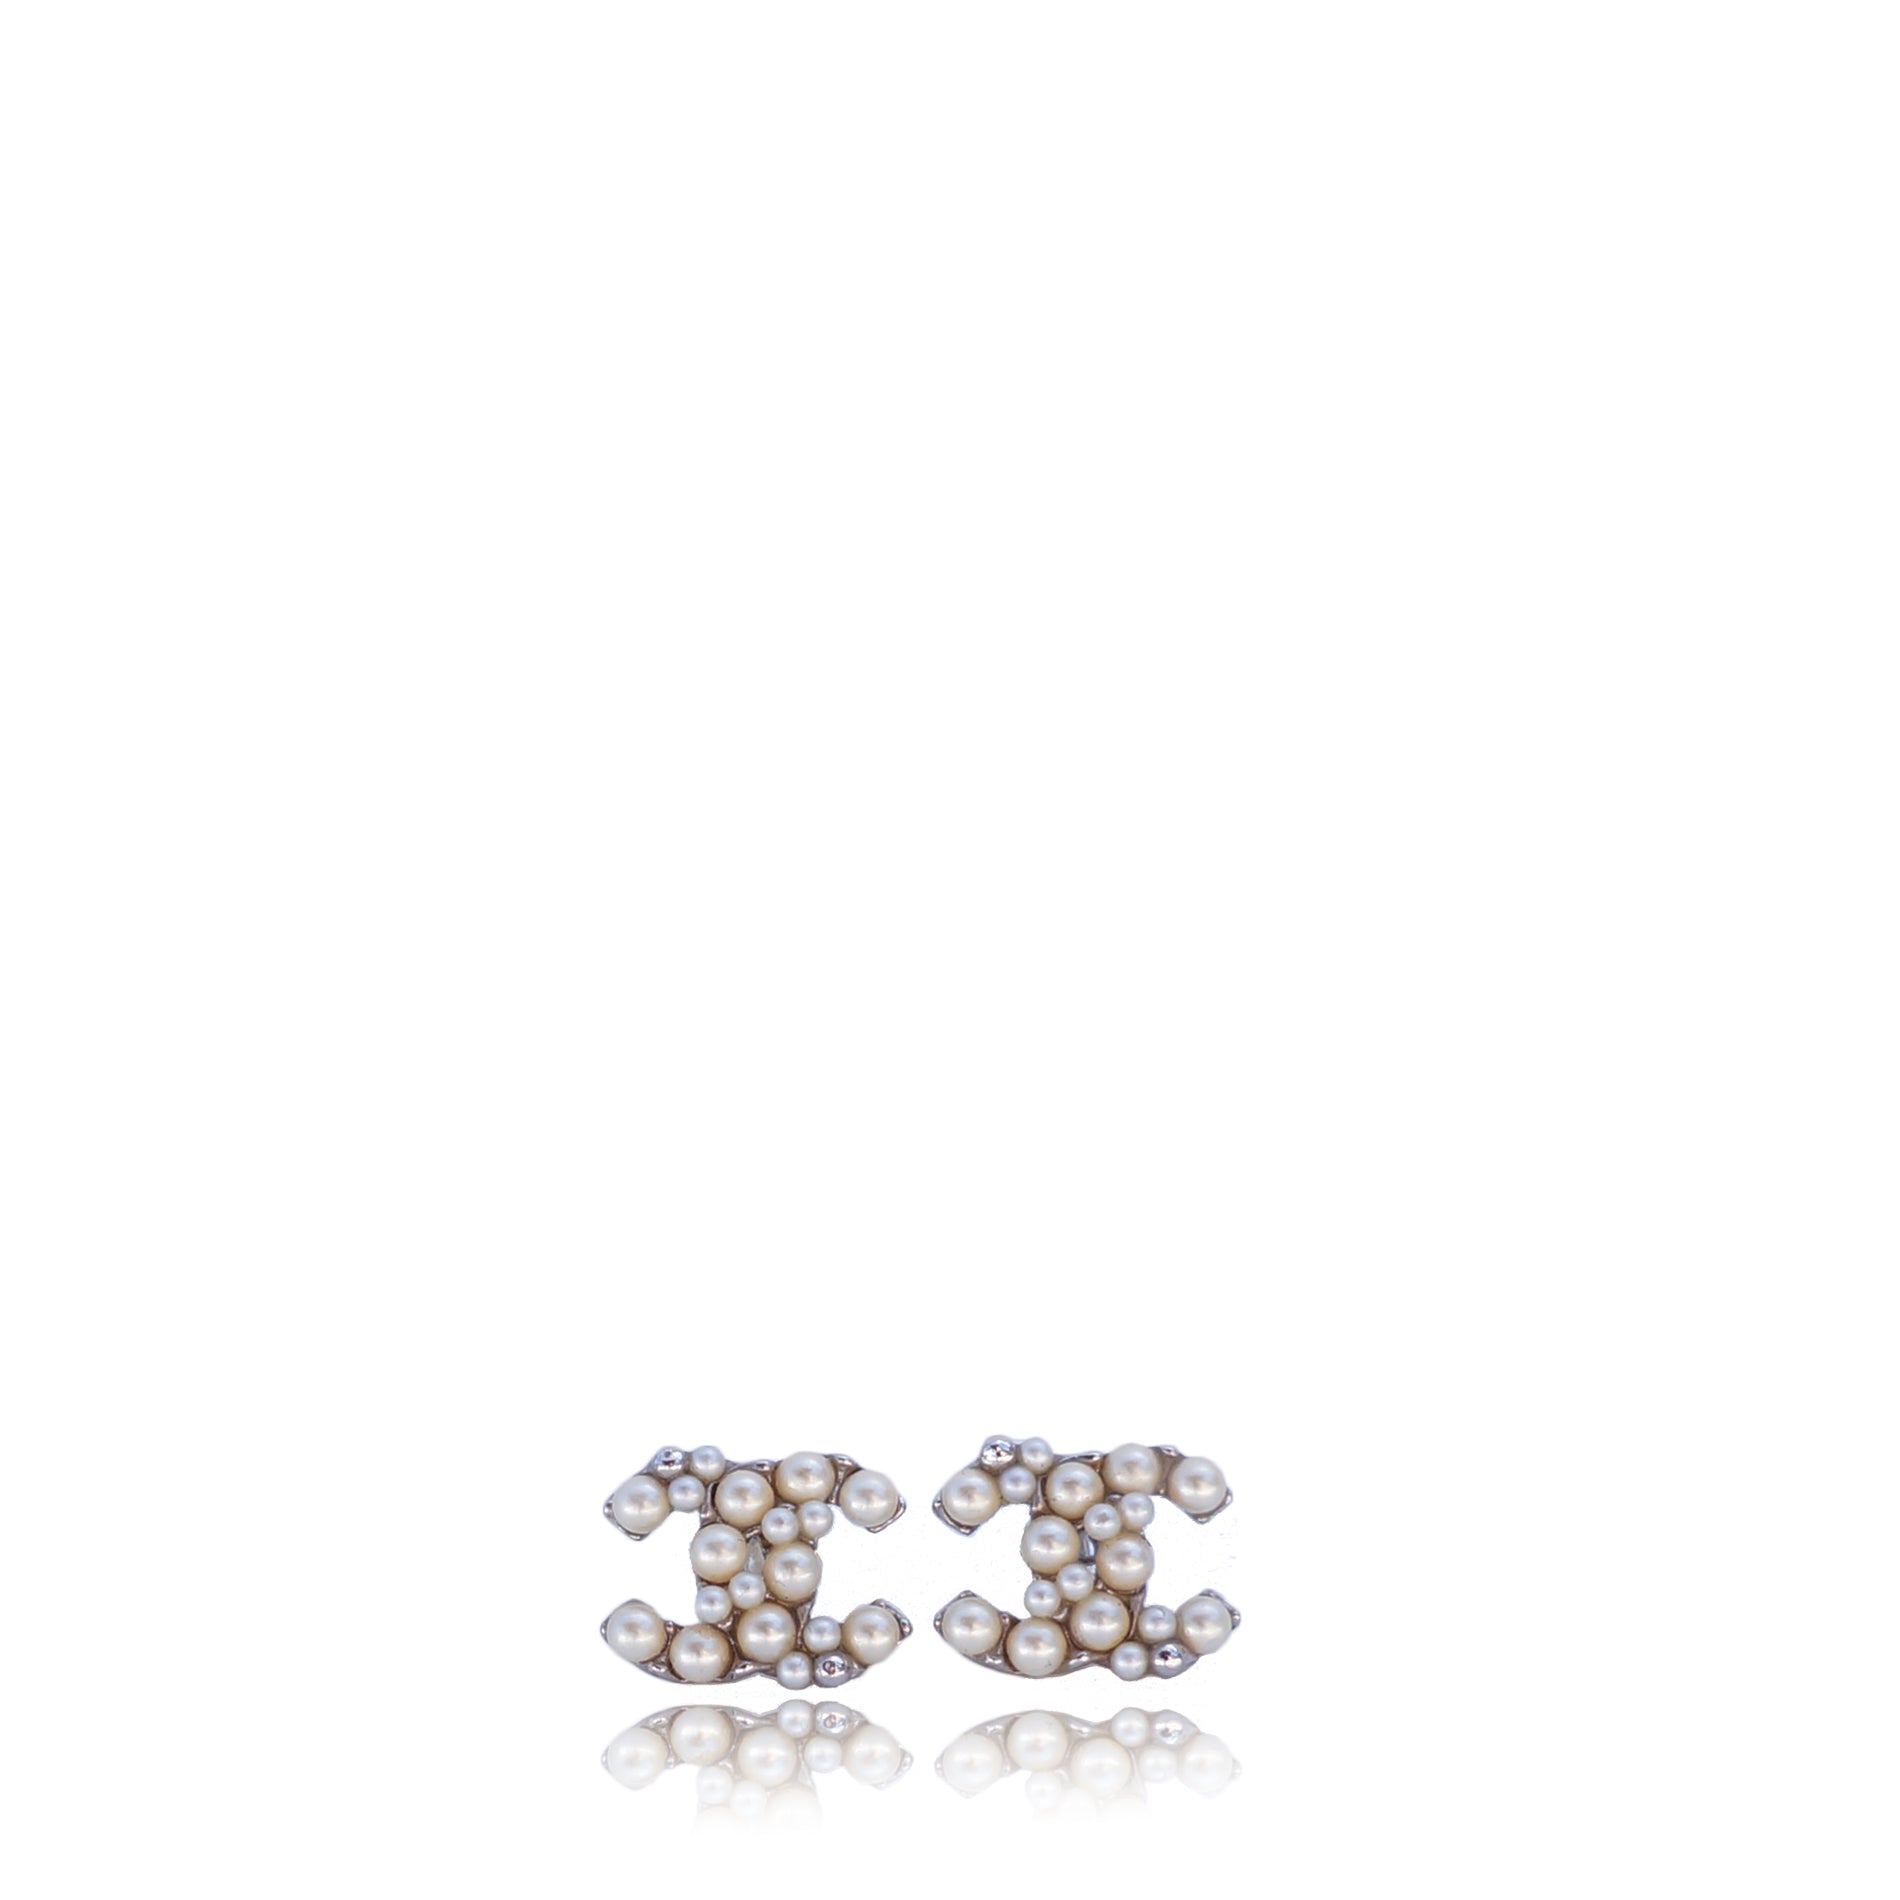 Silver Metal and Strass CC Earrings, 2007